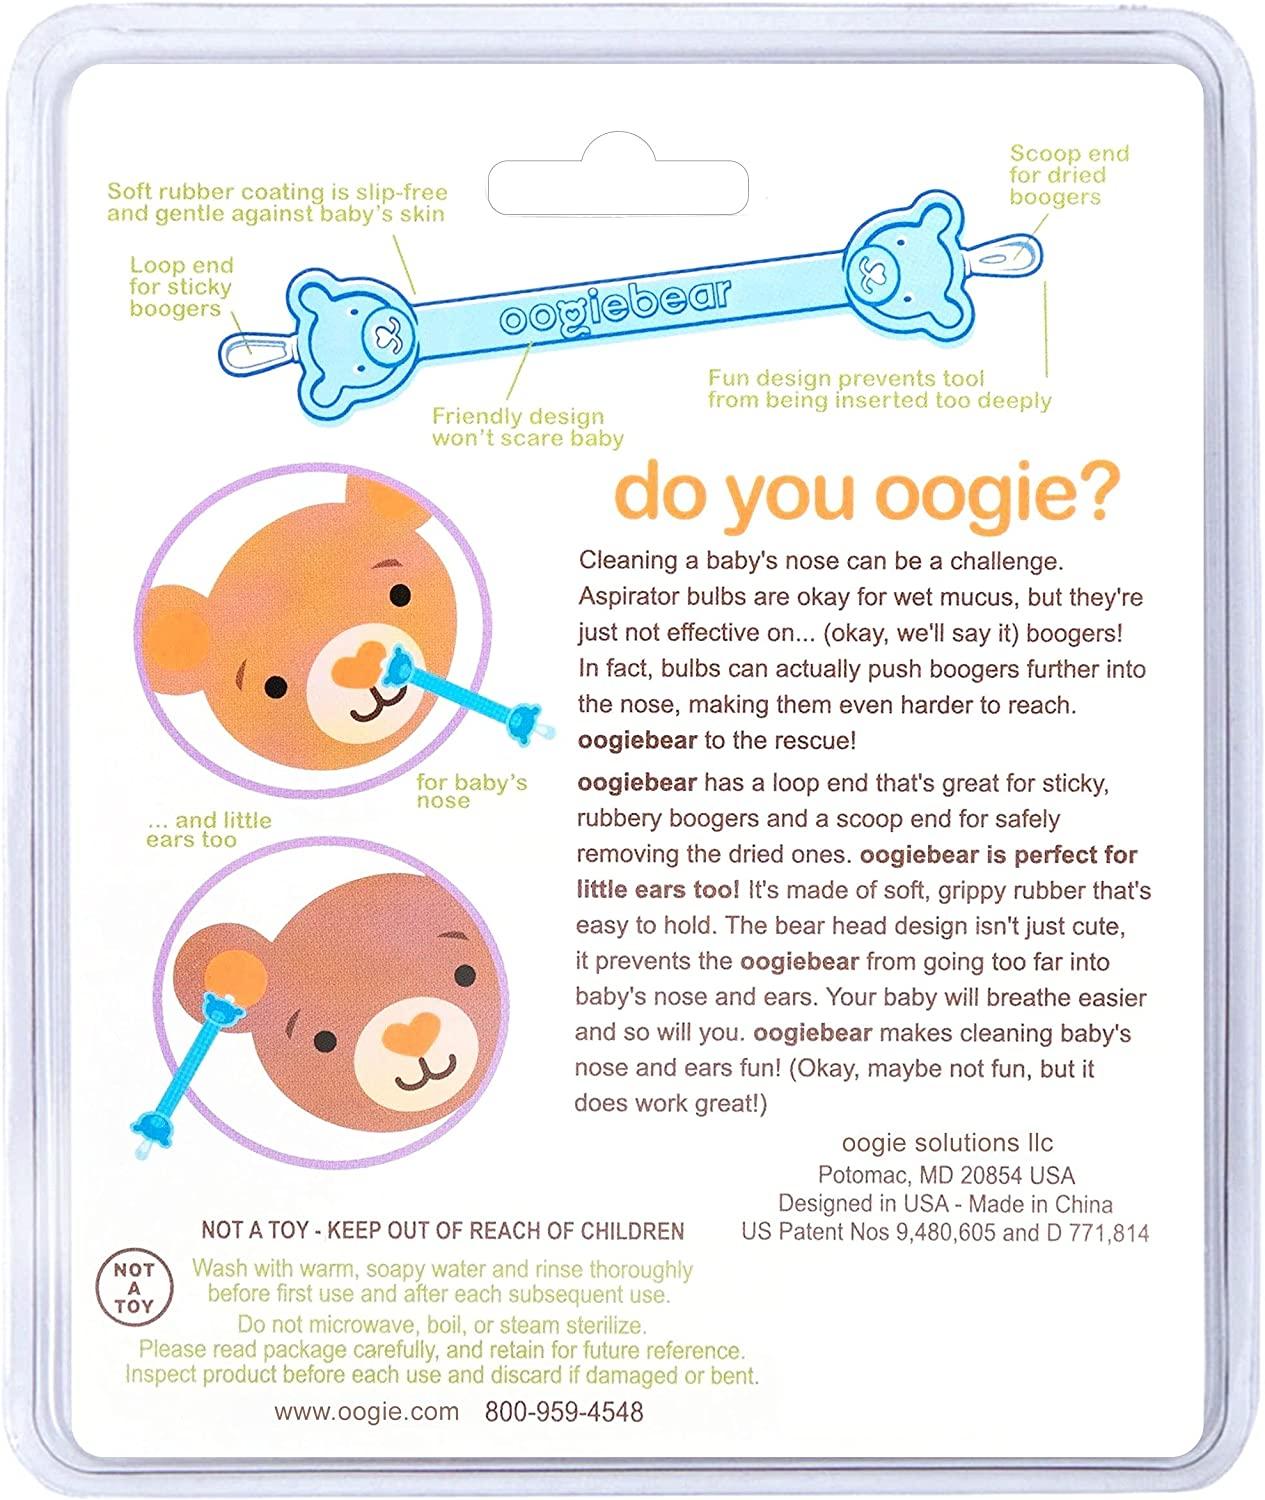 oogiebear - Nose and Ear Gadget. Safe, Easy Nasal Booger and Ear Cleaner  for Newborns and Infants. Dual Earwax and Snot Remover - 2 Pack with Case -  Orange and Seafoam 1 Orange + 1 Seafoam booger picker